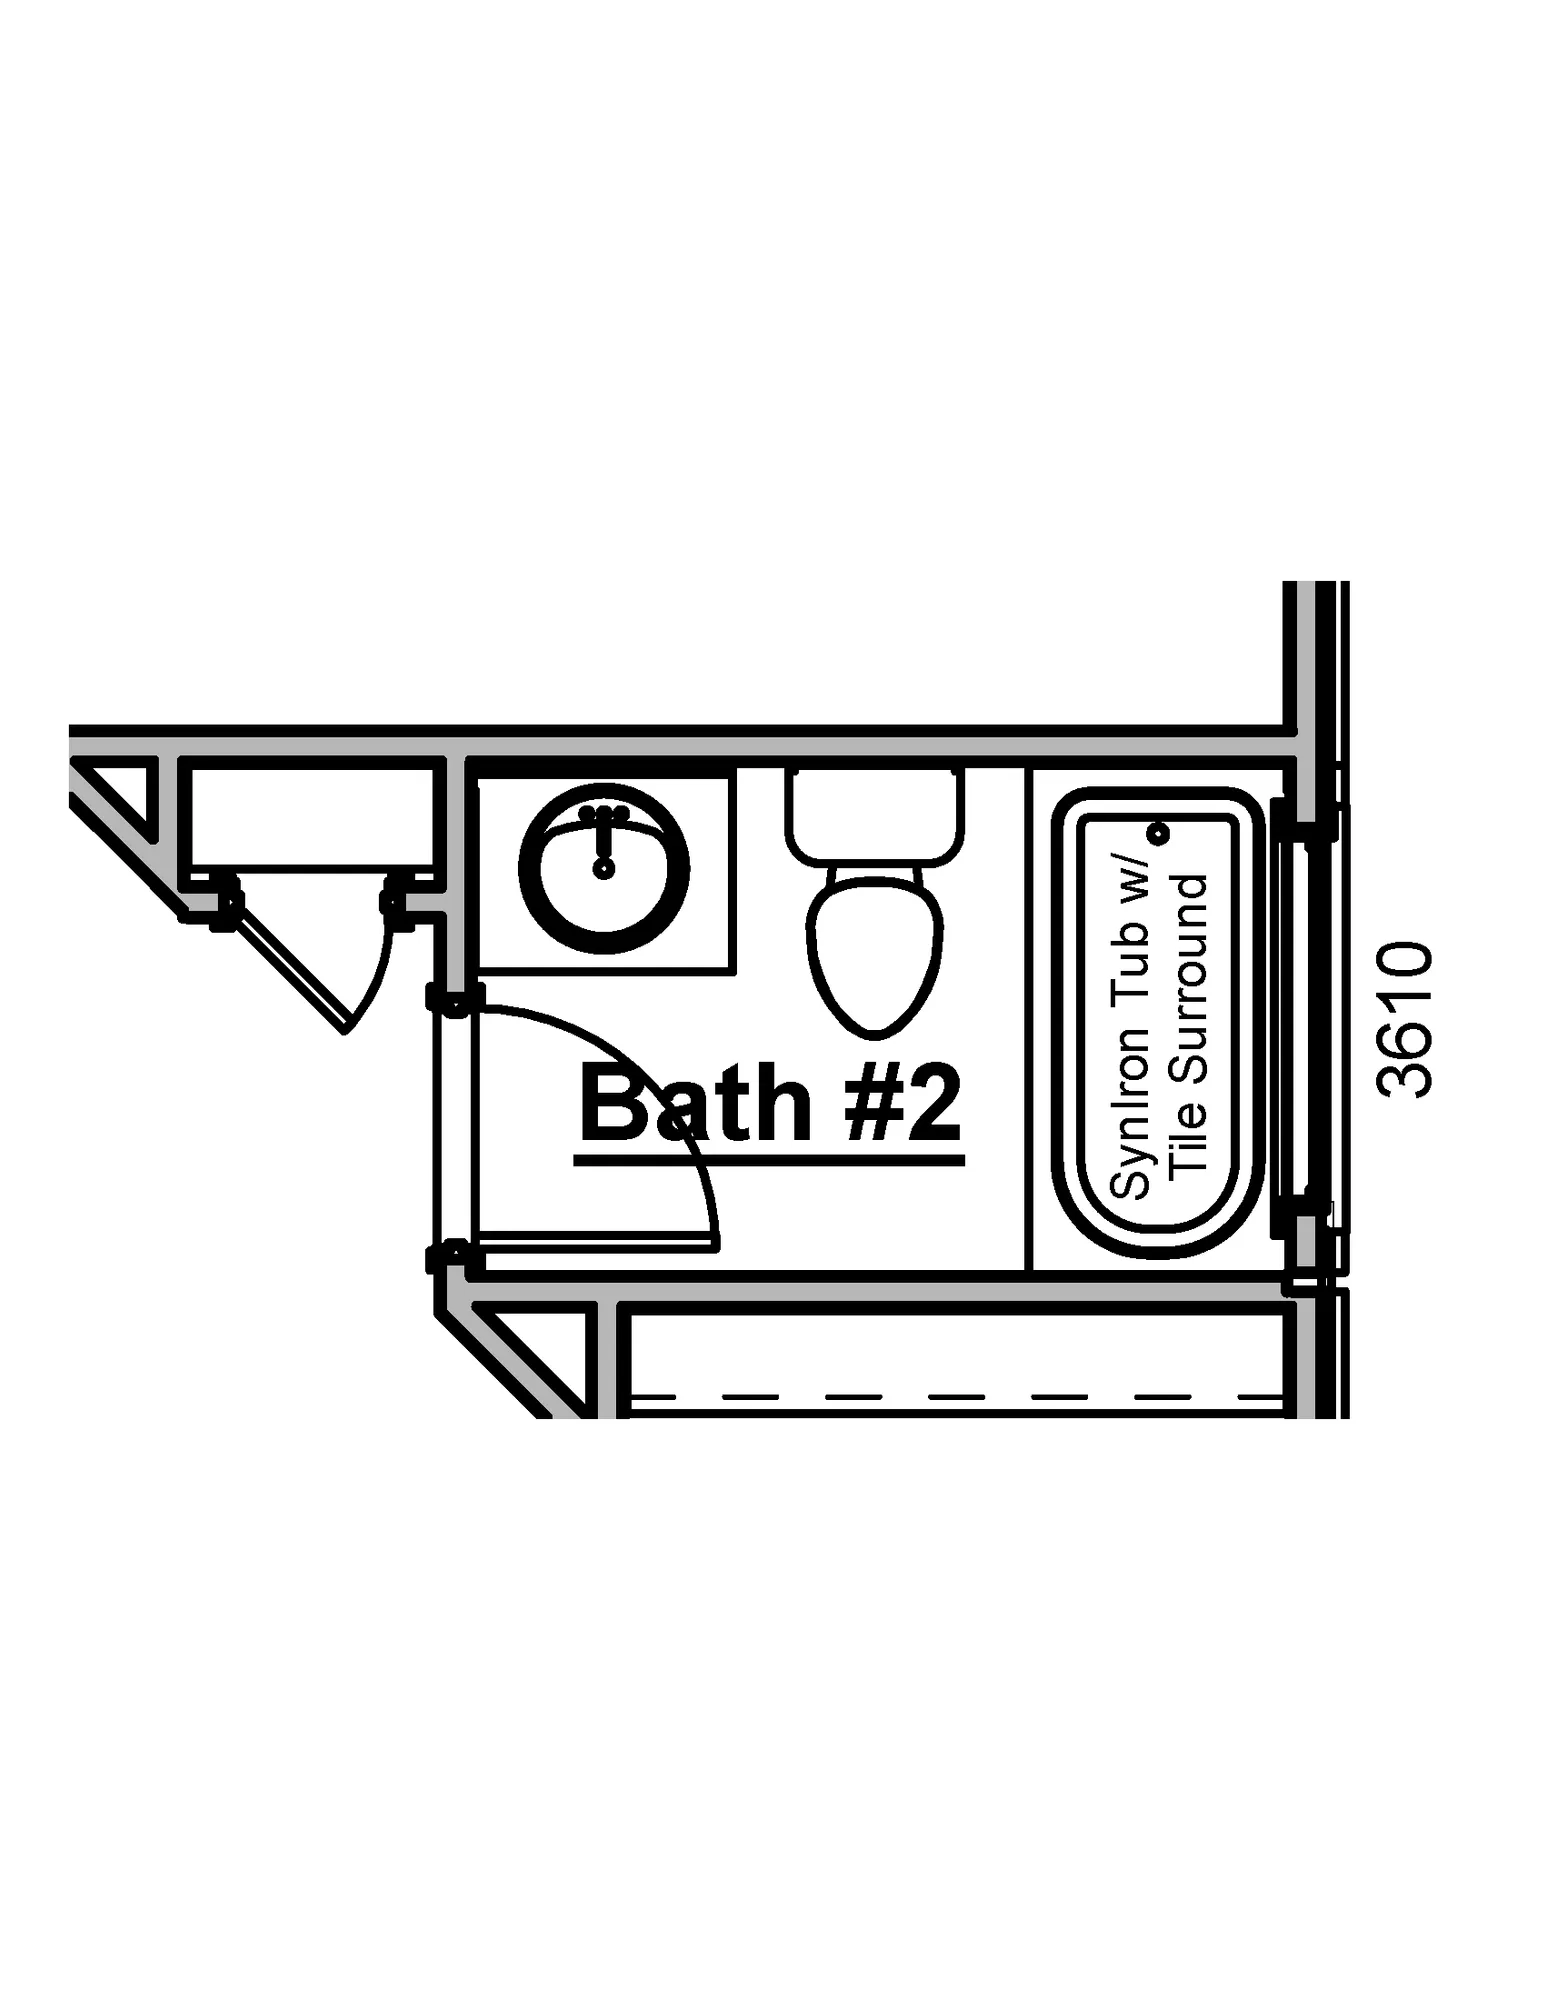 Interior Bath #2 Tub Shower Combo with Tile Surround and Transom Window Option - undefined